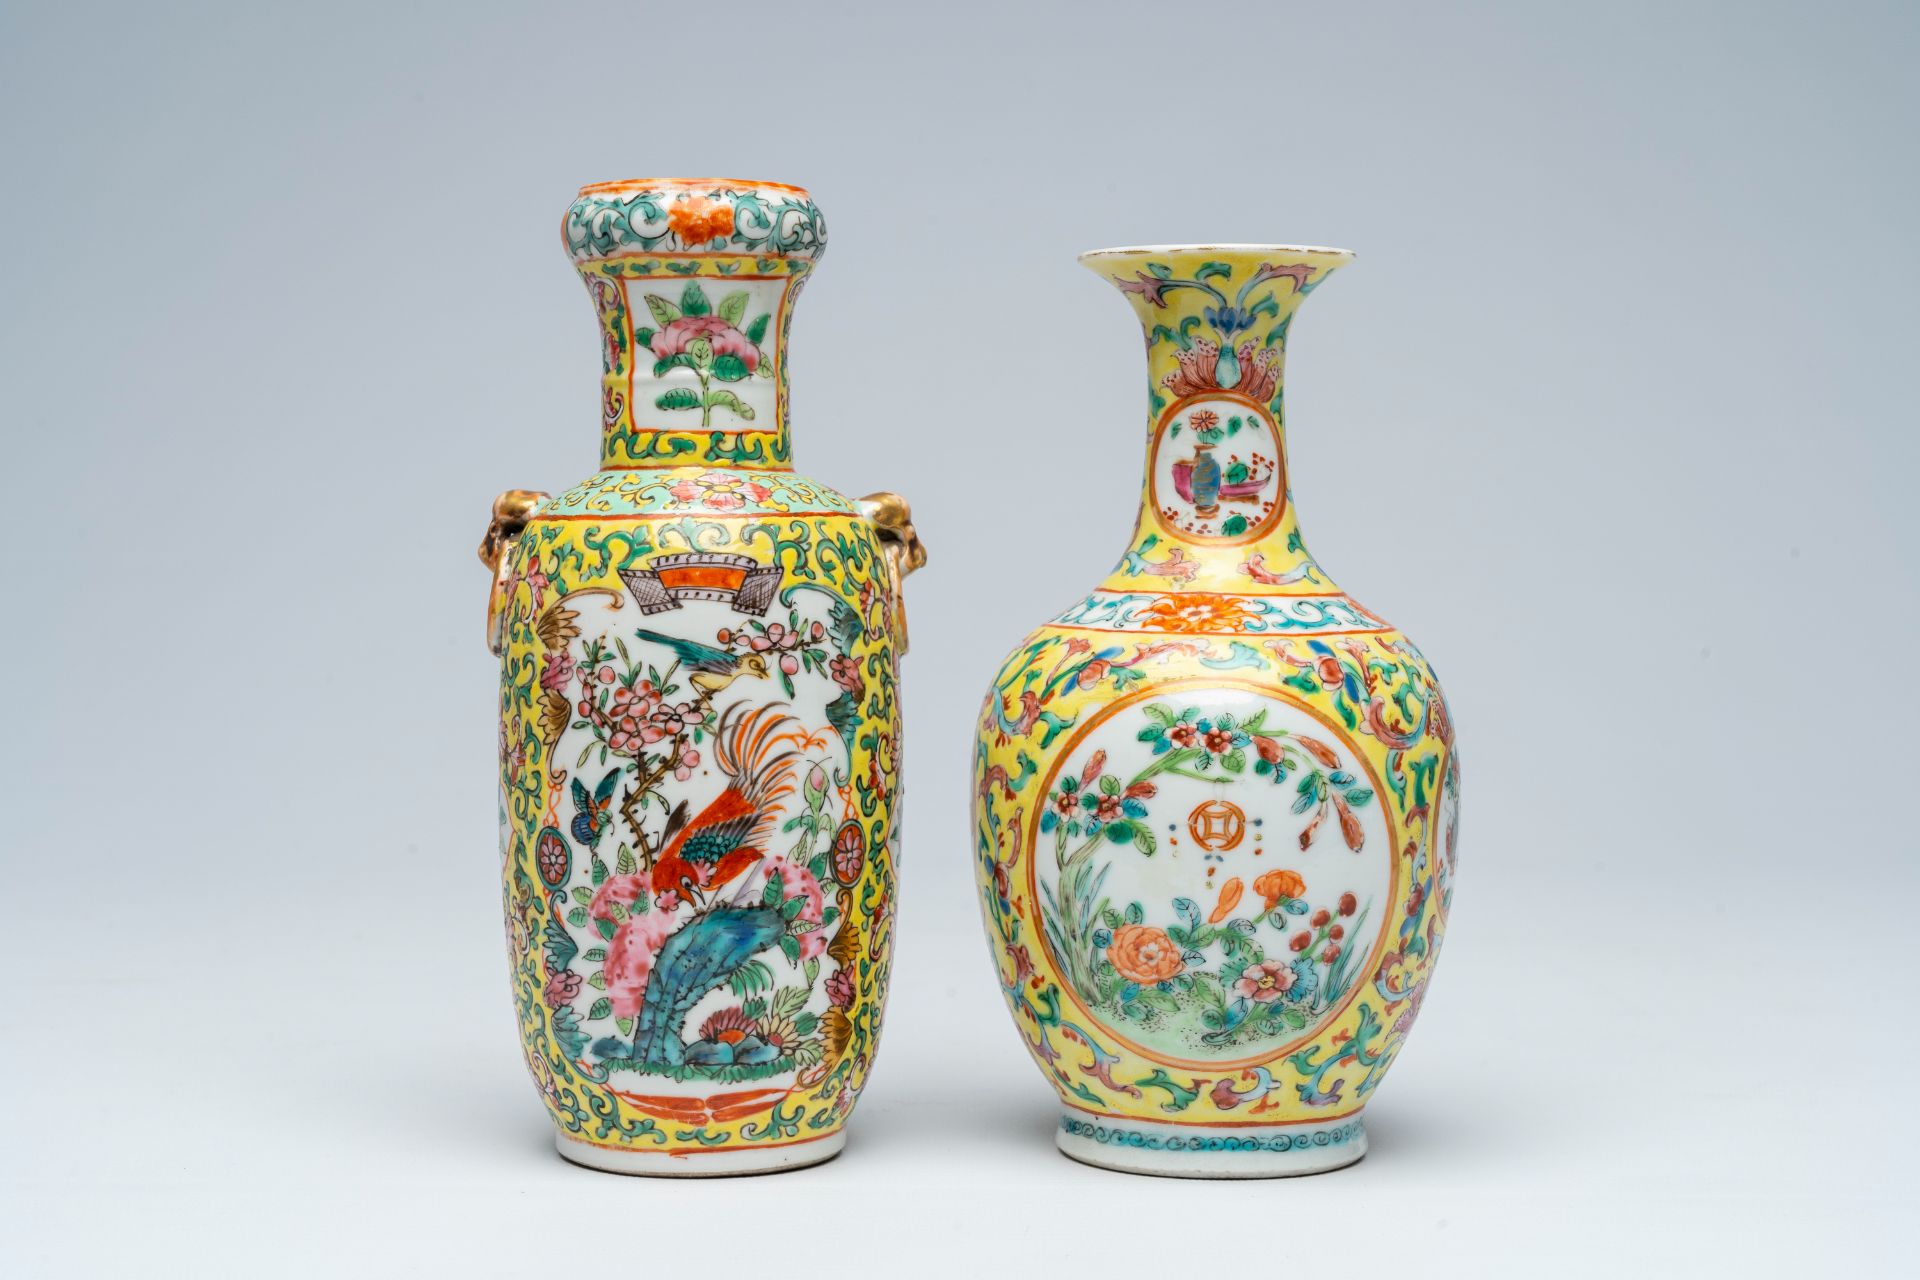 Two Chinese famille rose yellow ground vases with antiquities and floral design, 19th C. - Image 3 of 6